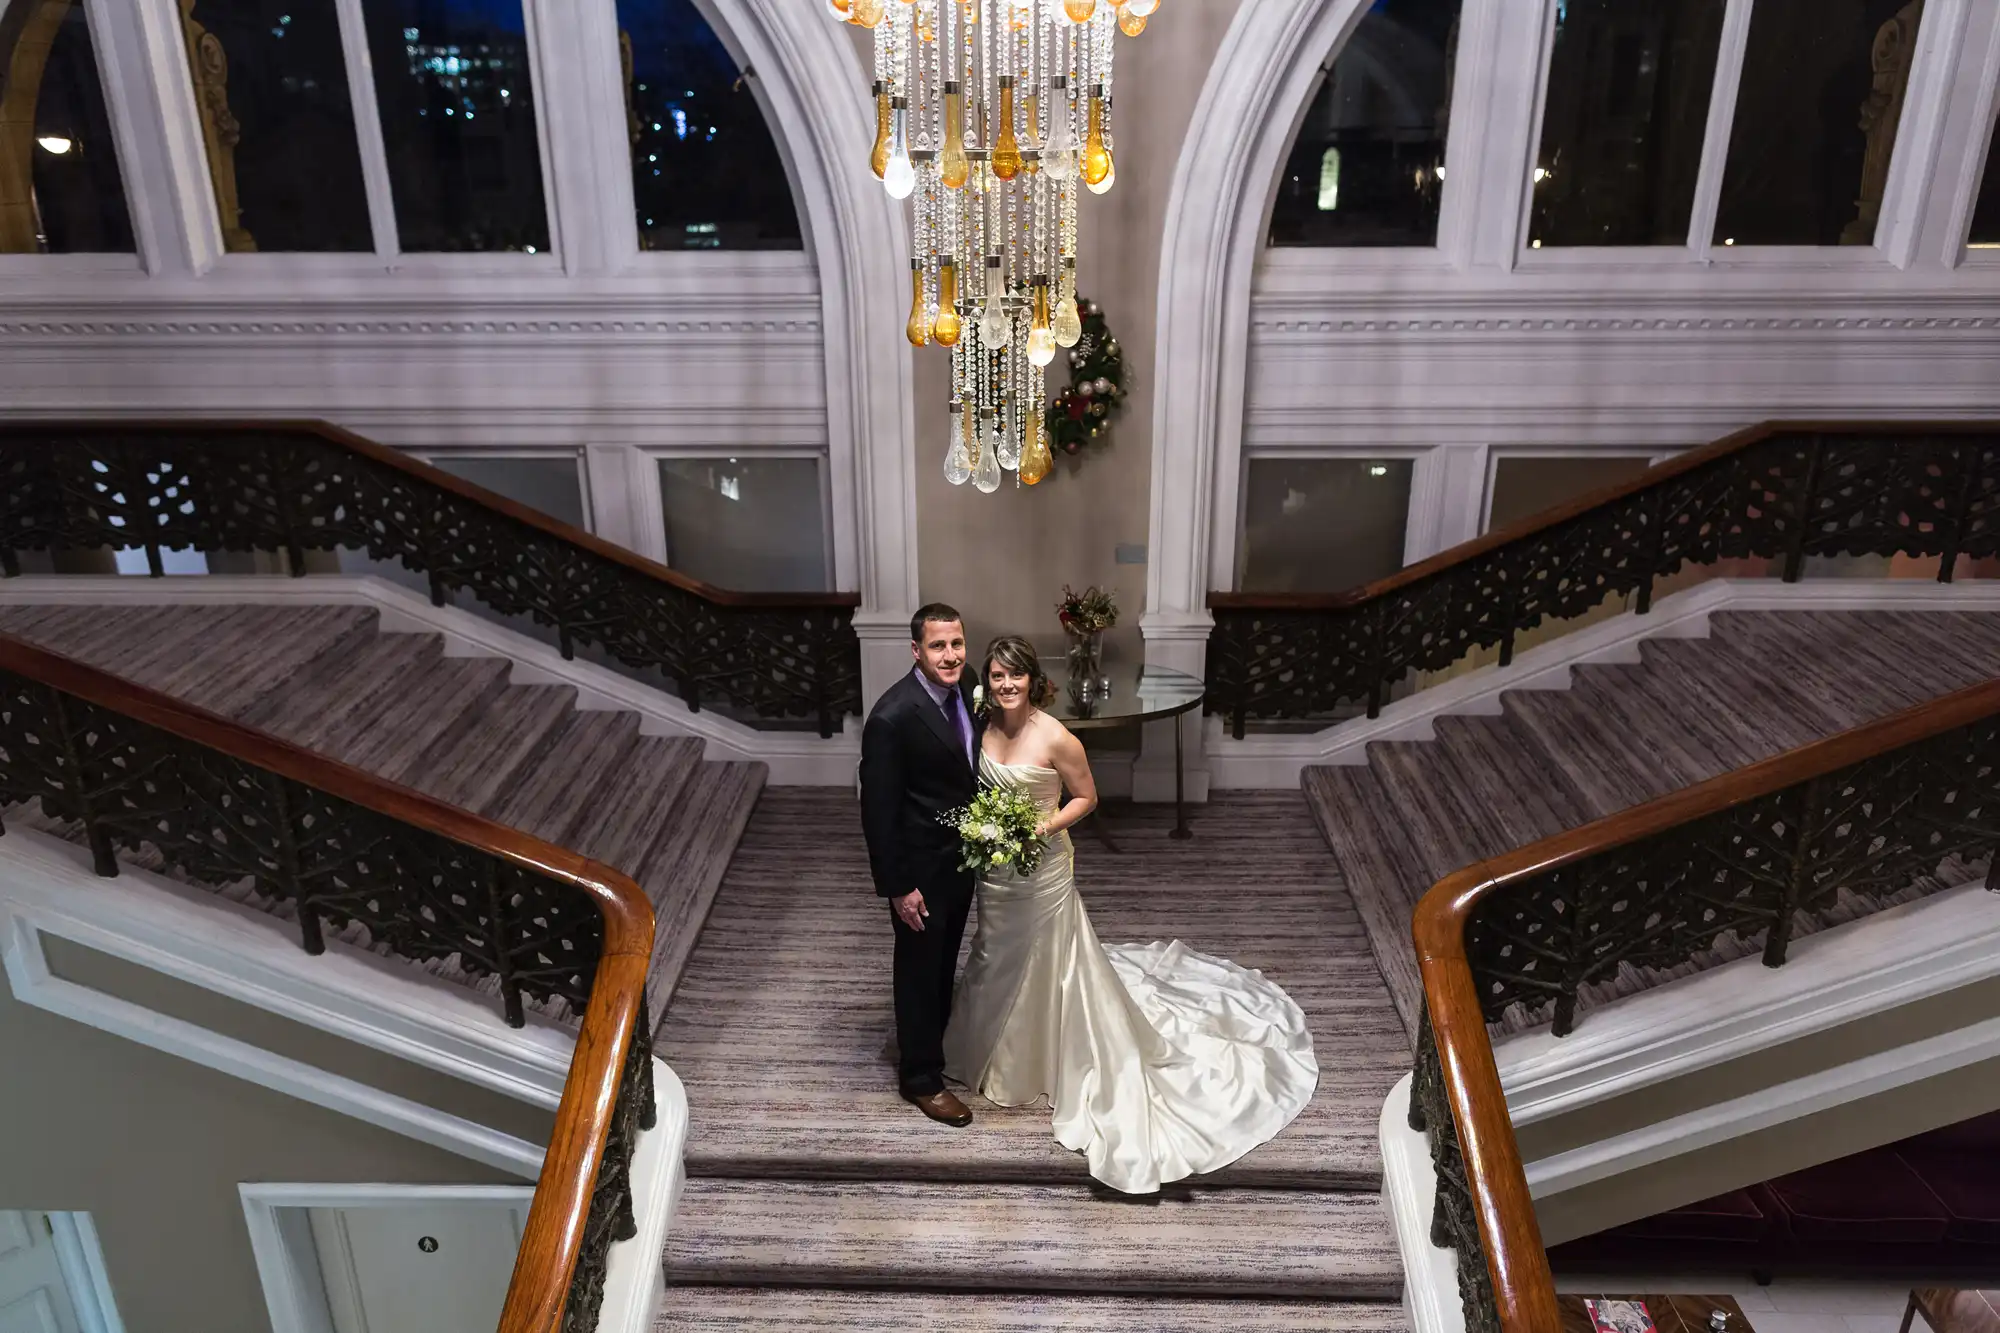 A newly married couple stands smiling on an ornate staircase under a chandelier, in an elegant building.